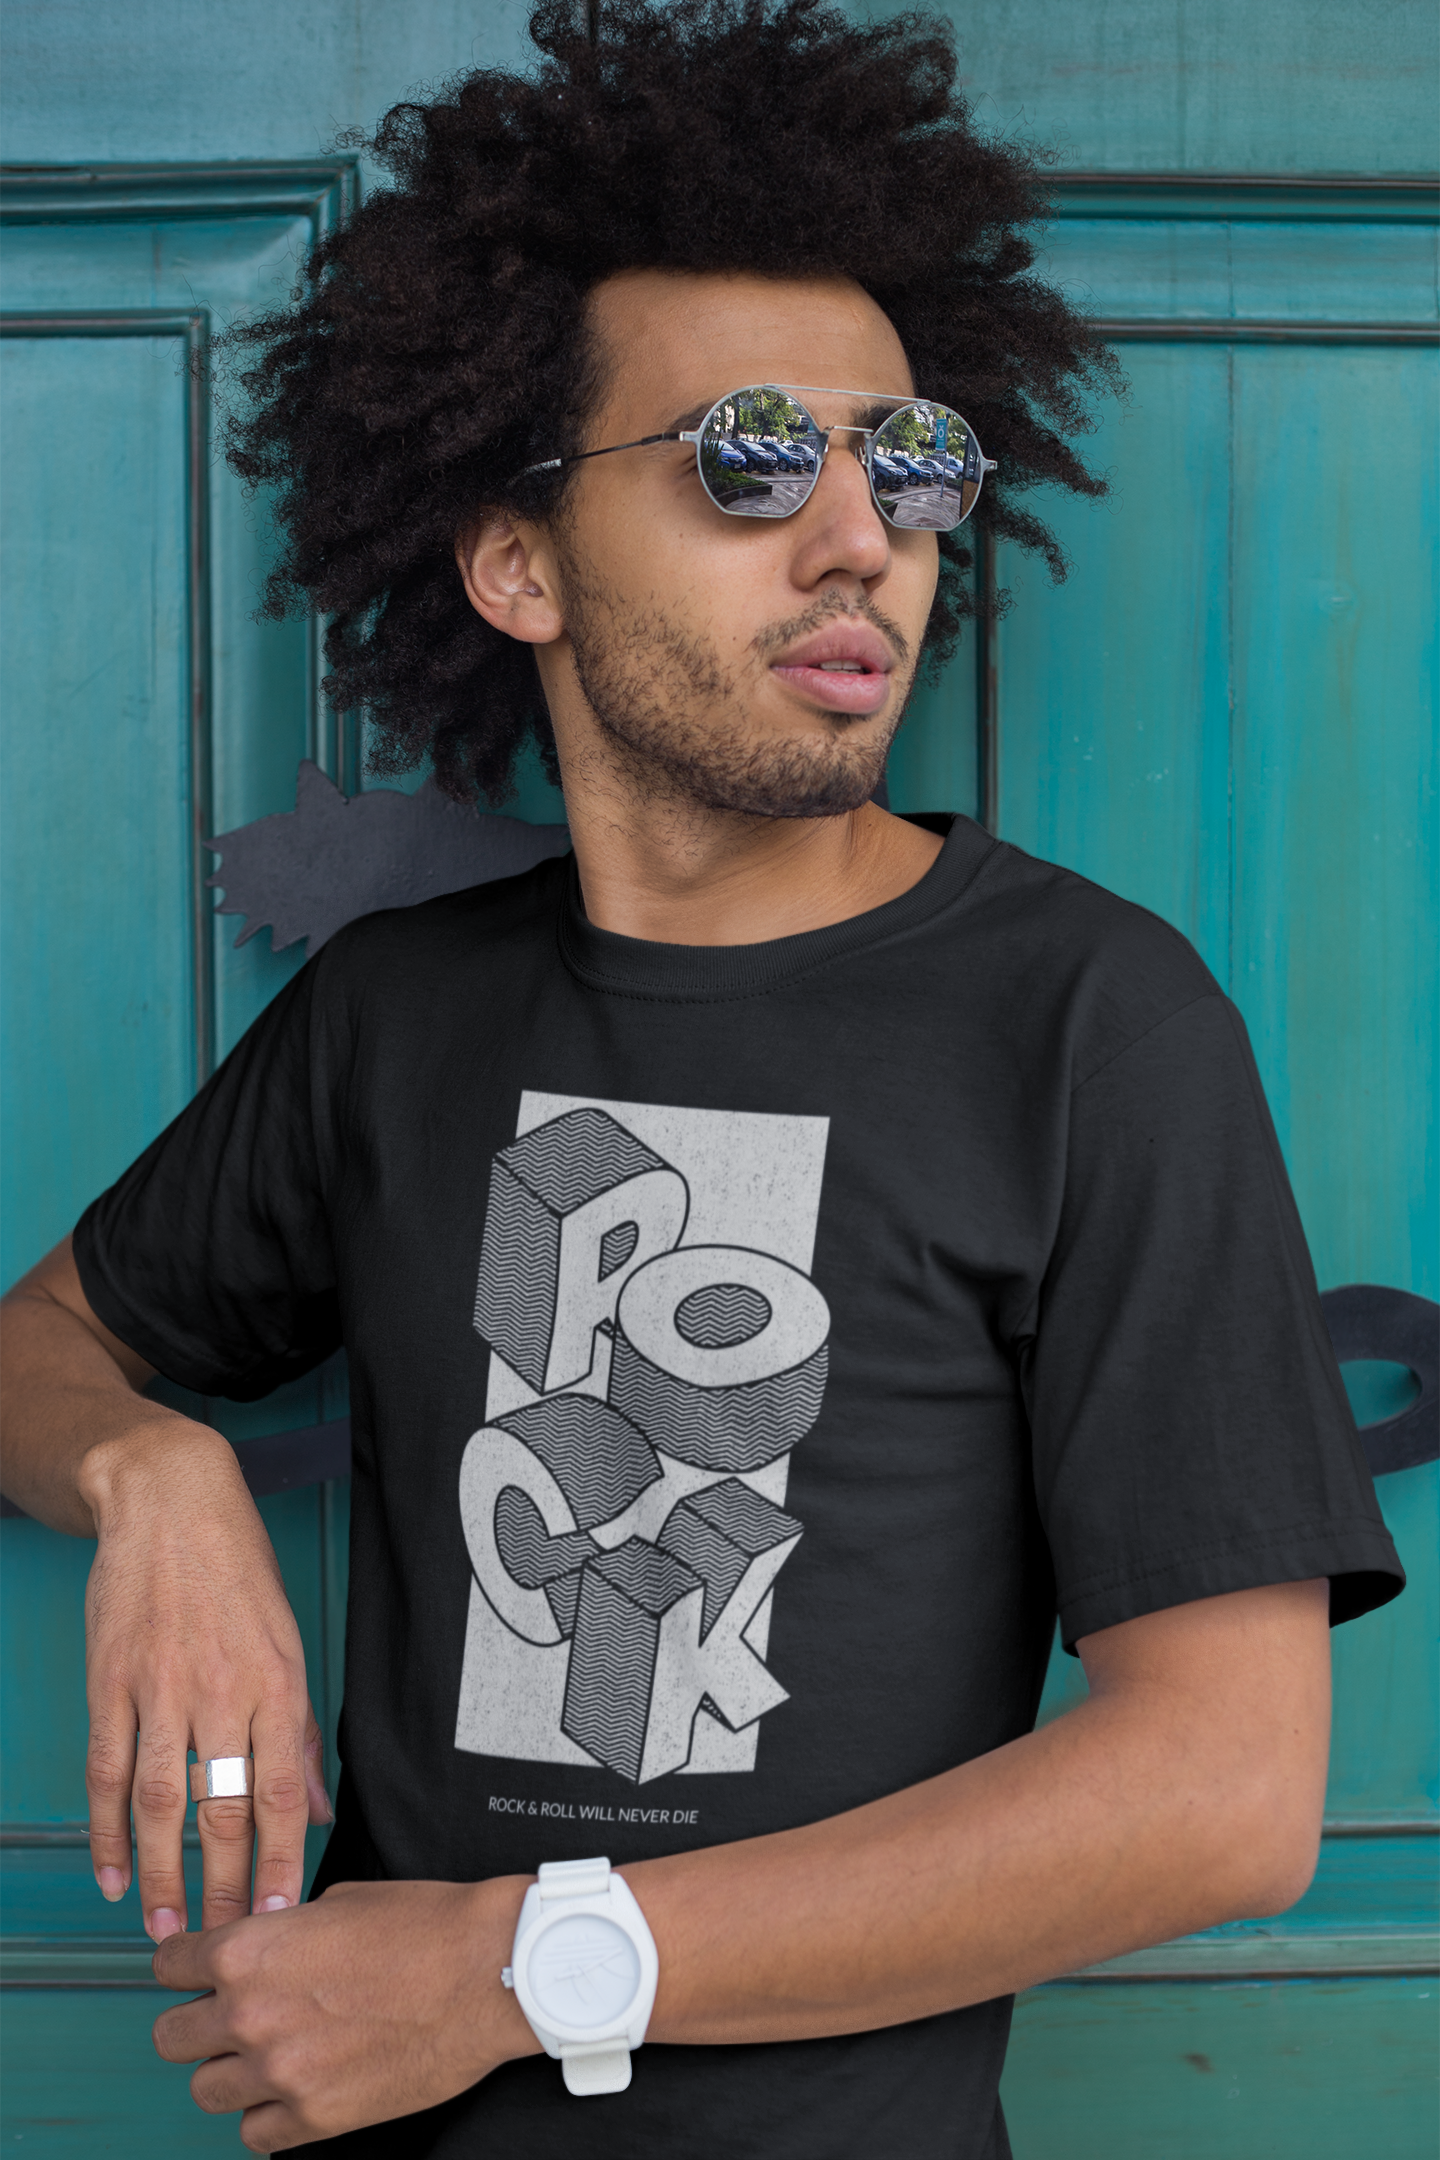 ROCK (Rock & Roll Will Never Die) 80s 3D illustration Printed Unisex organic cotton t-shirt